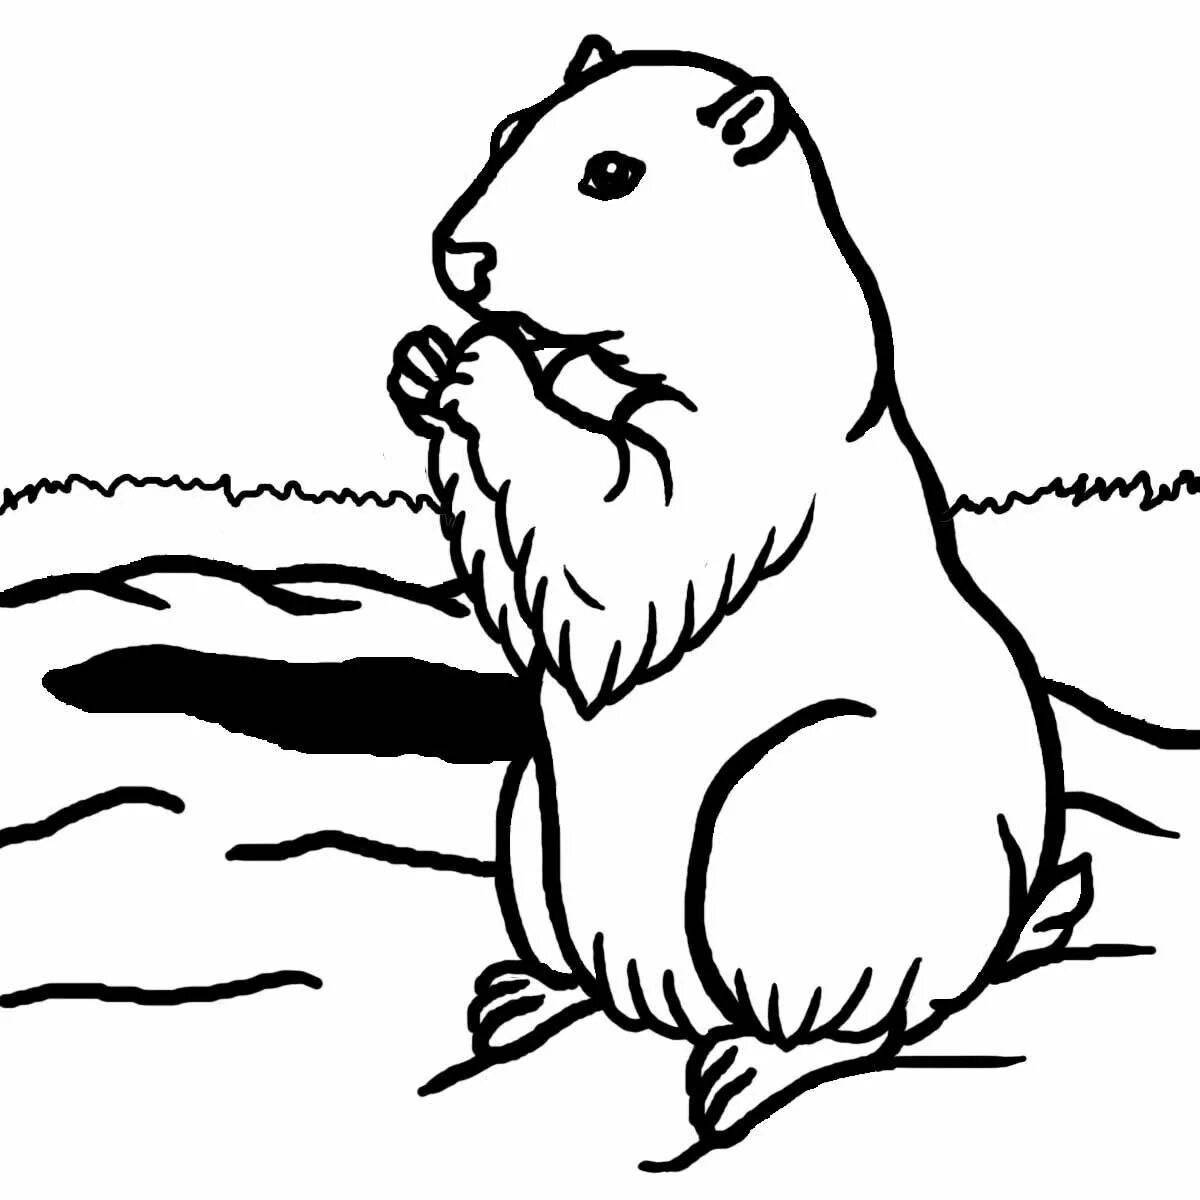 Adorable groundhog day coloring page